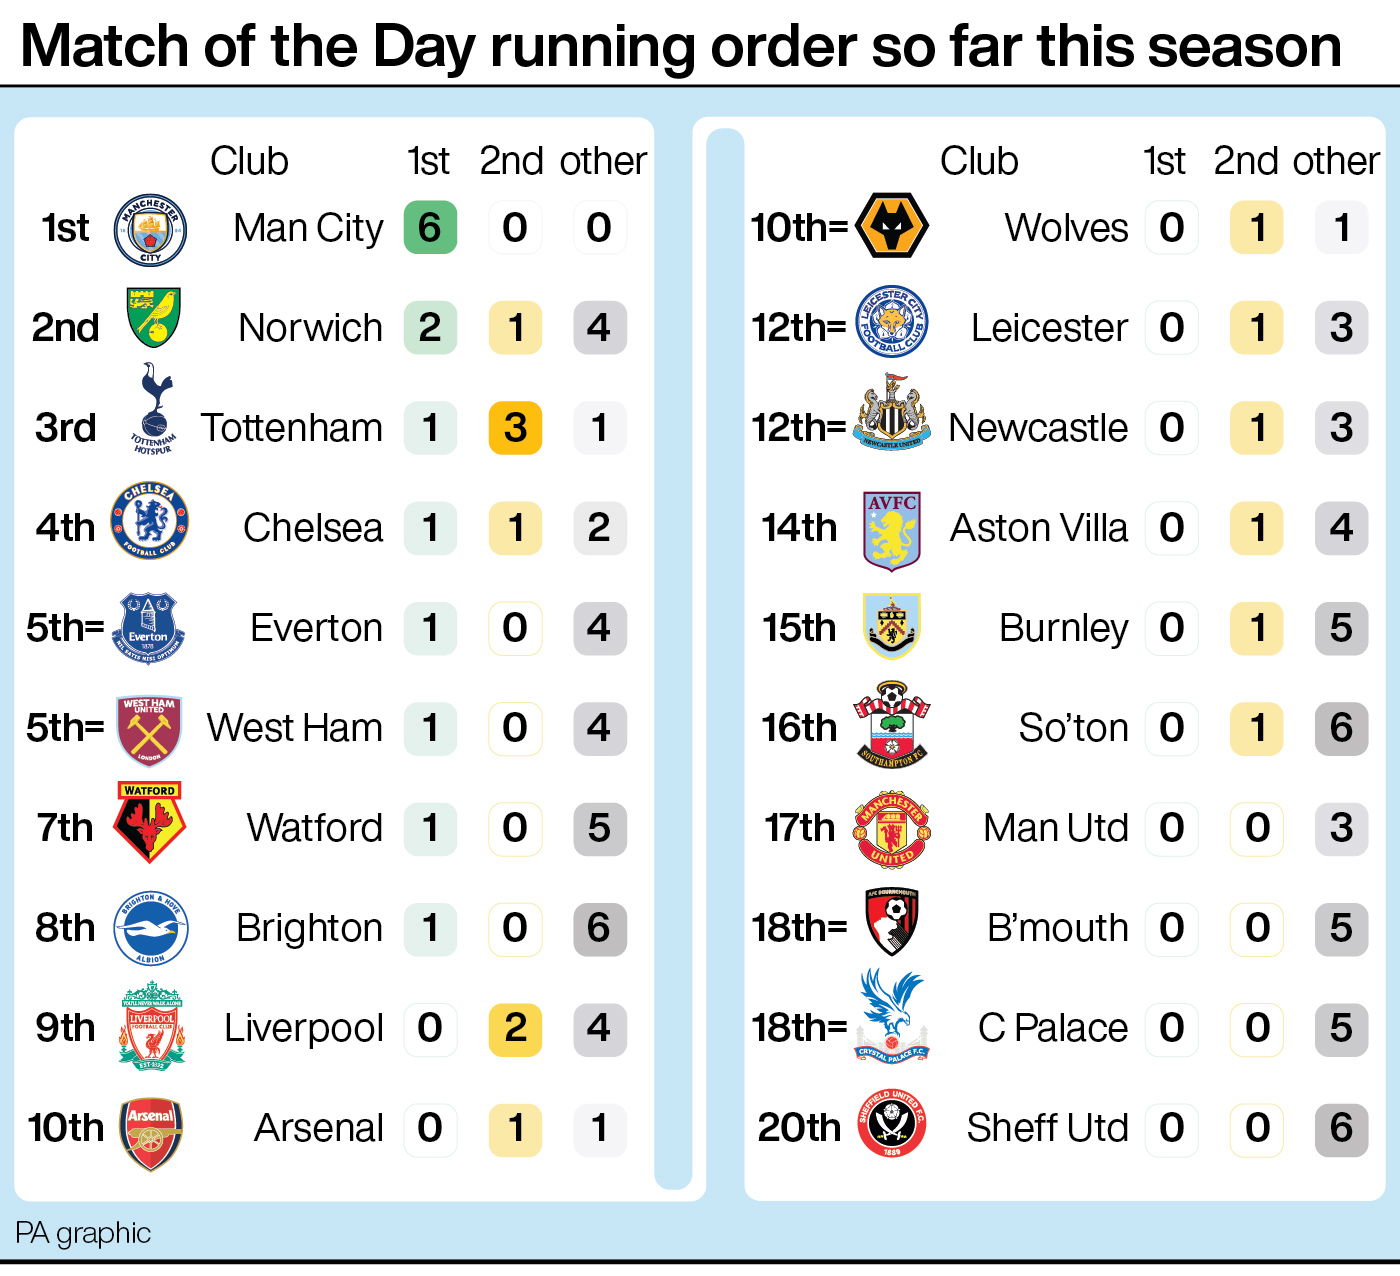 Match of the Day running order this season